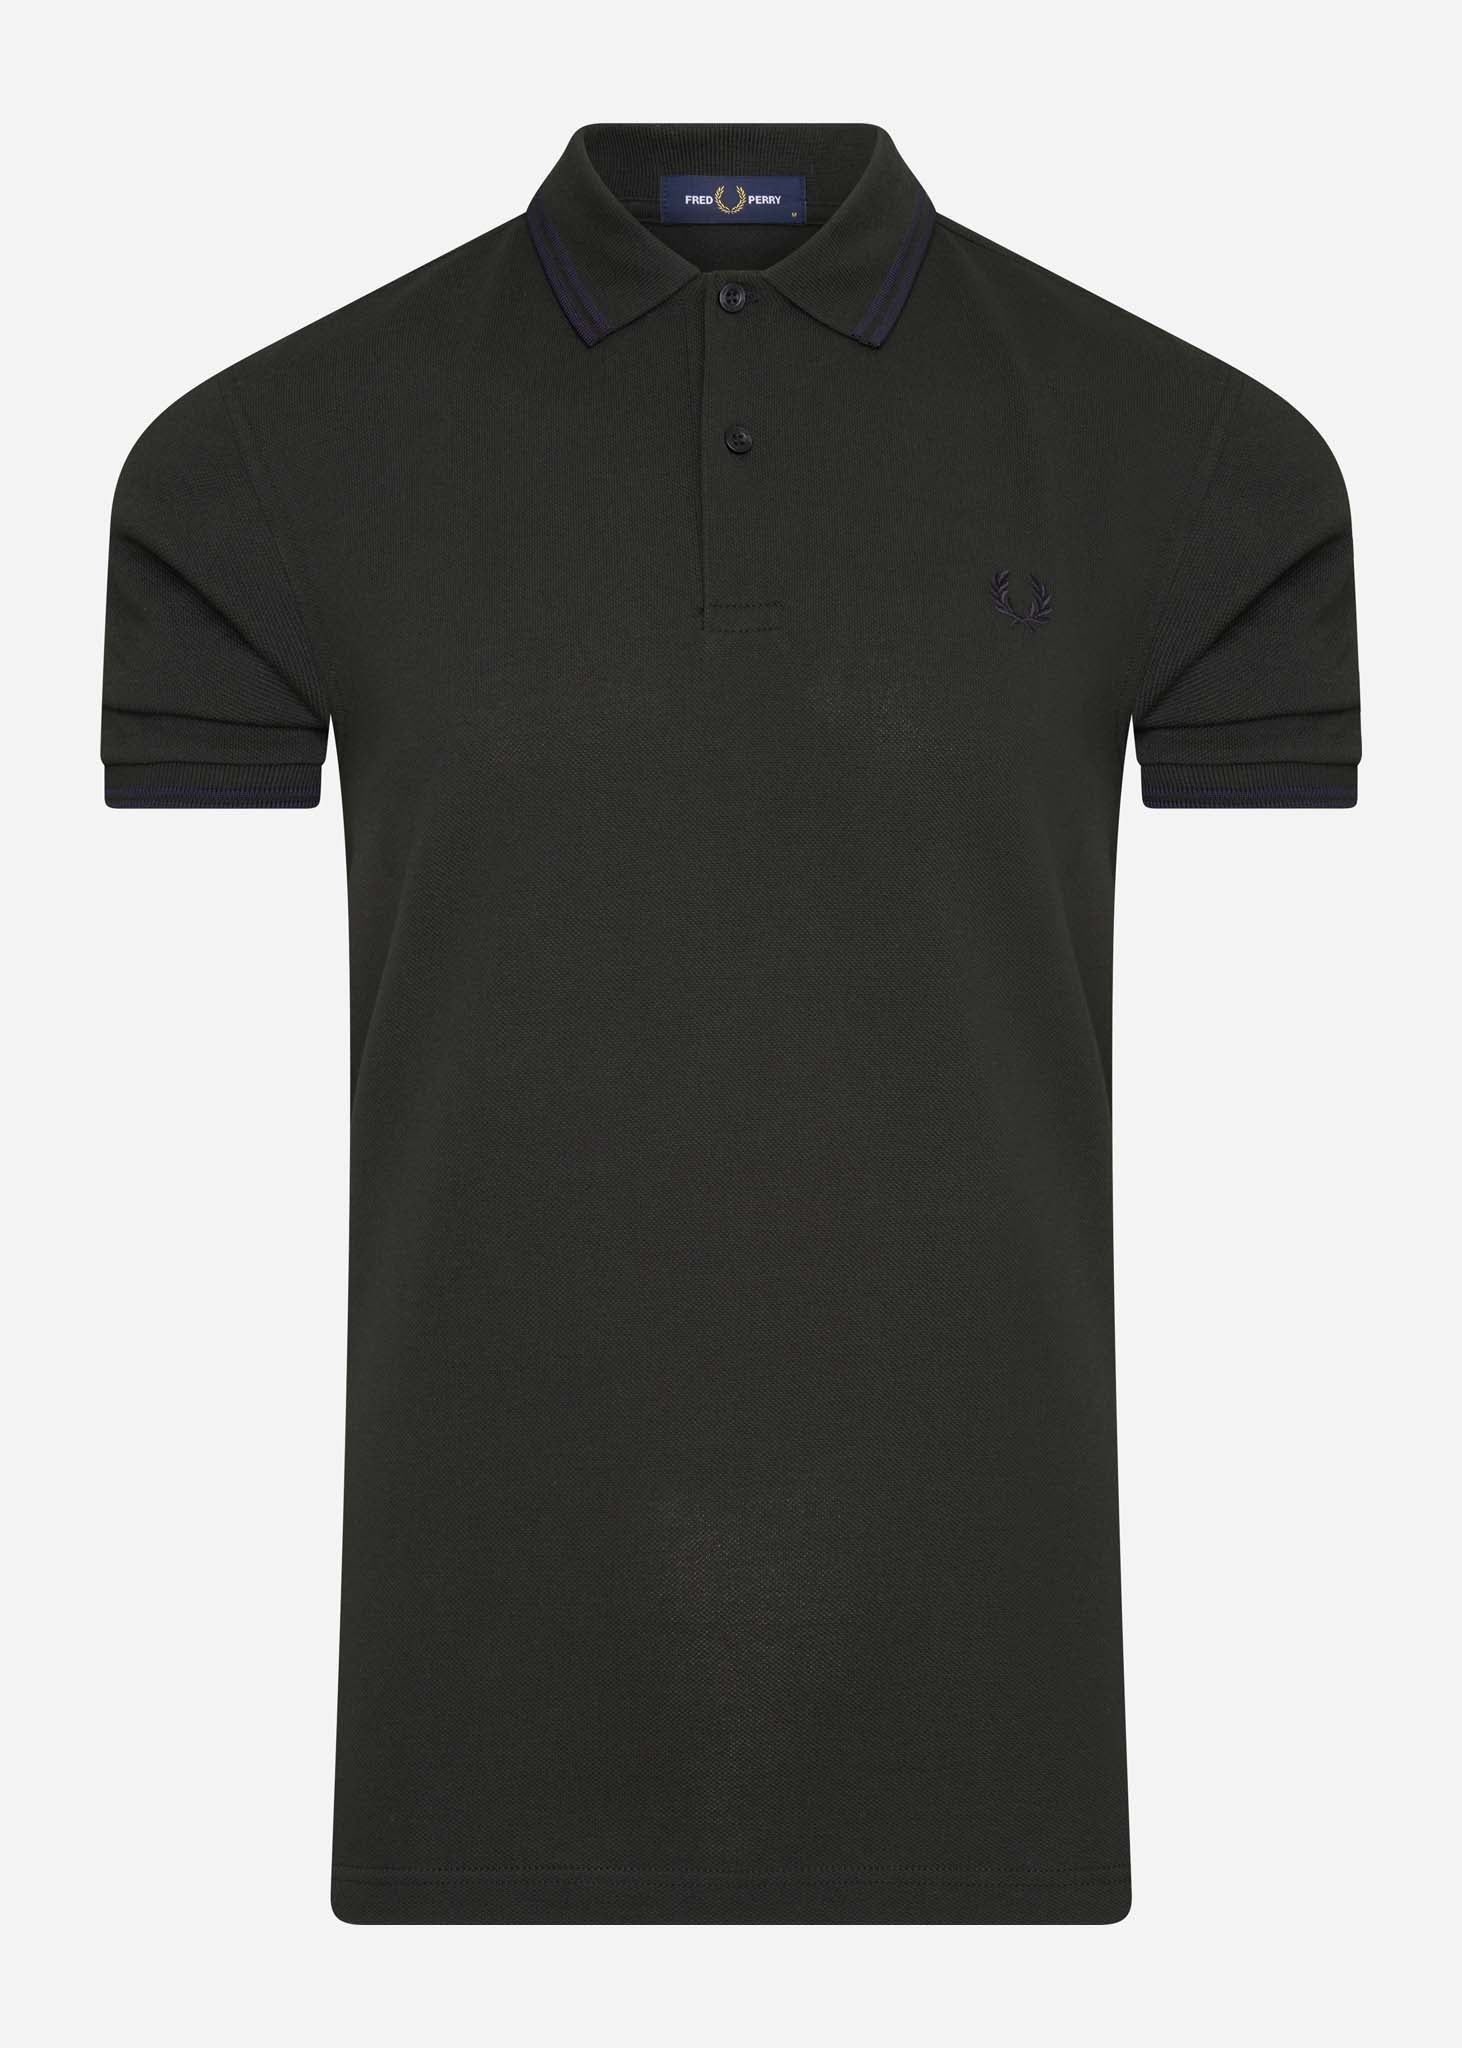 fred perry polo racing green